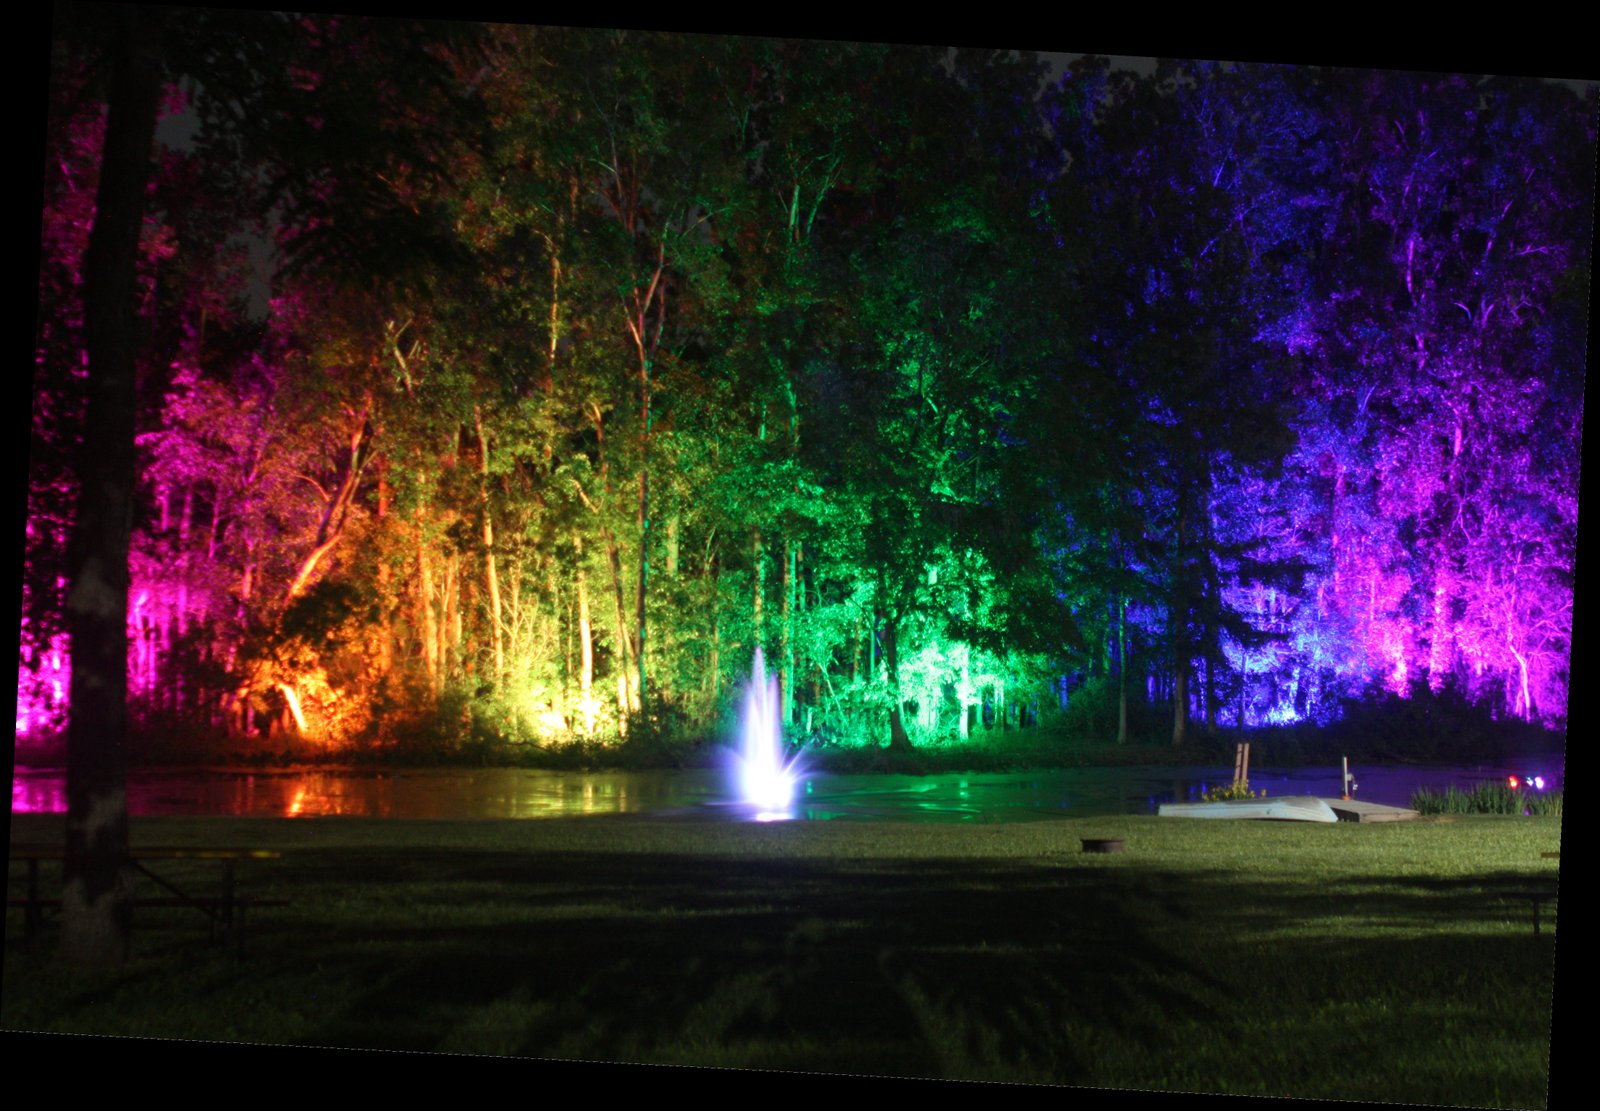 CRC back pond at night with rainbow colored up-lights along the back trees.